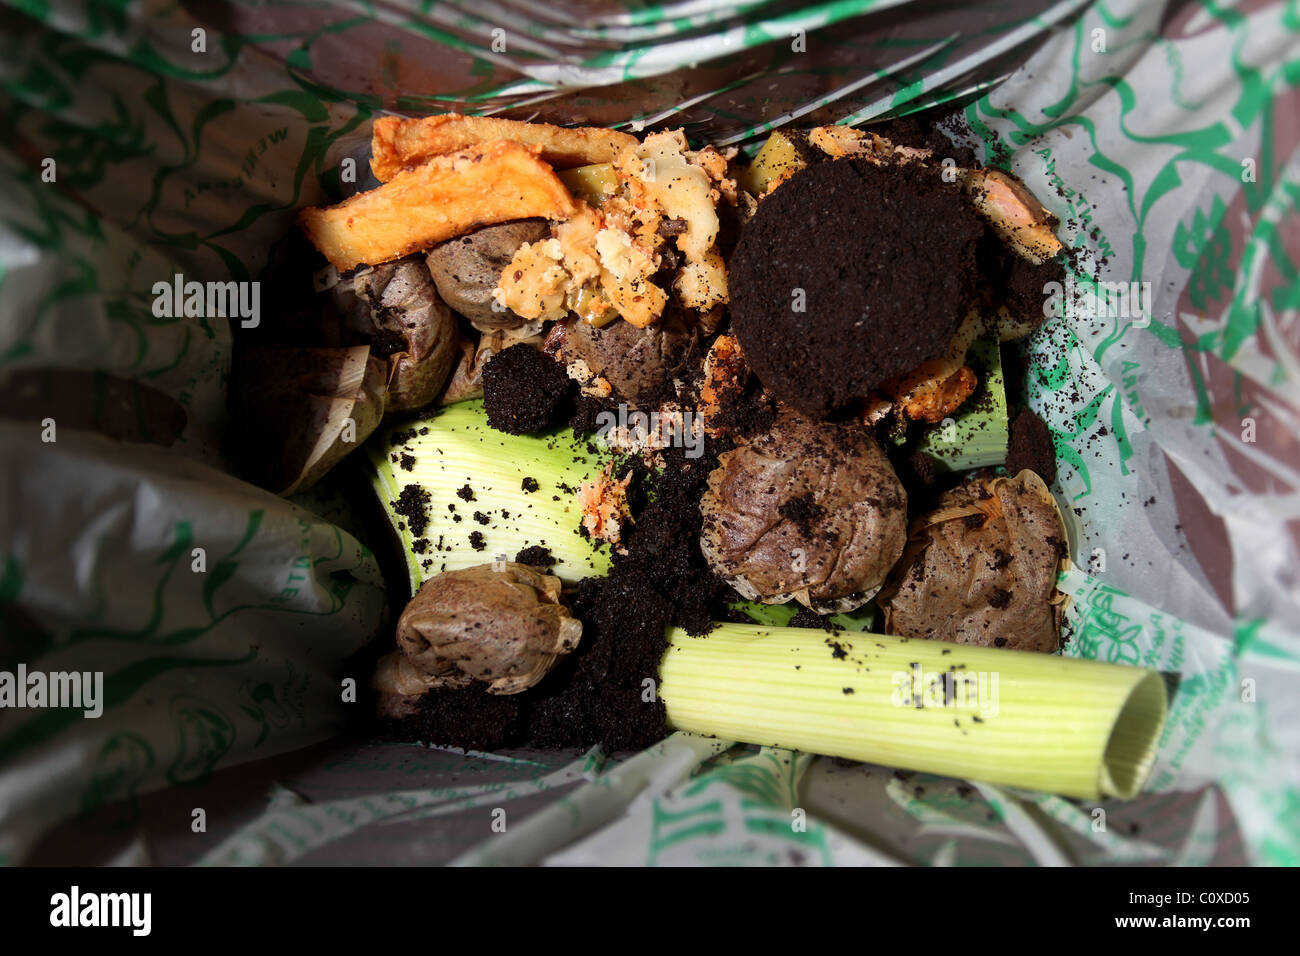 Stock picture of a food waste recycle box in a kitchen in Southampton, UK. Stock Photo